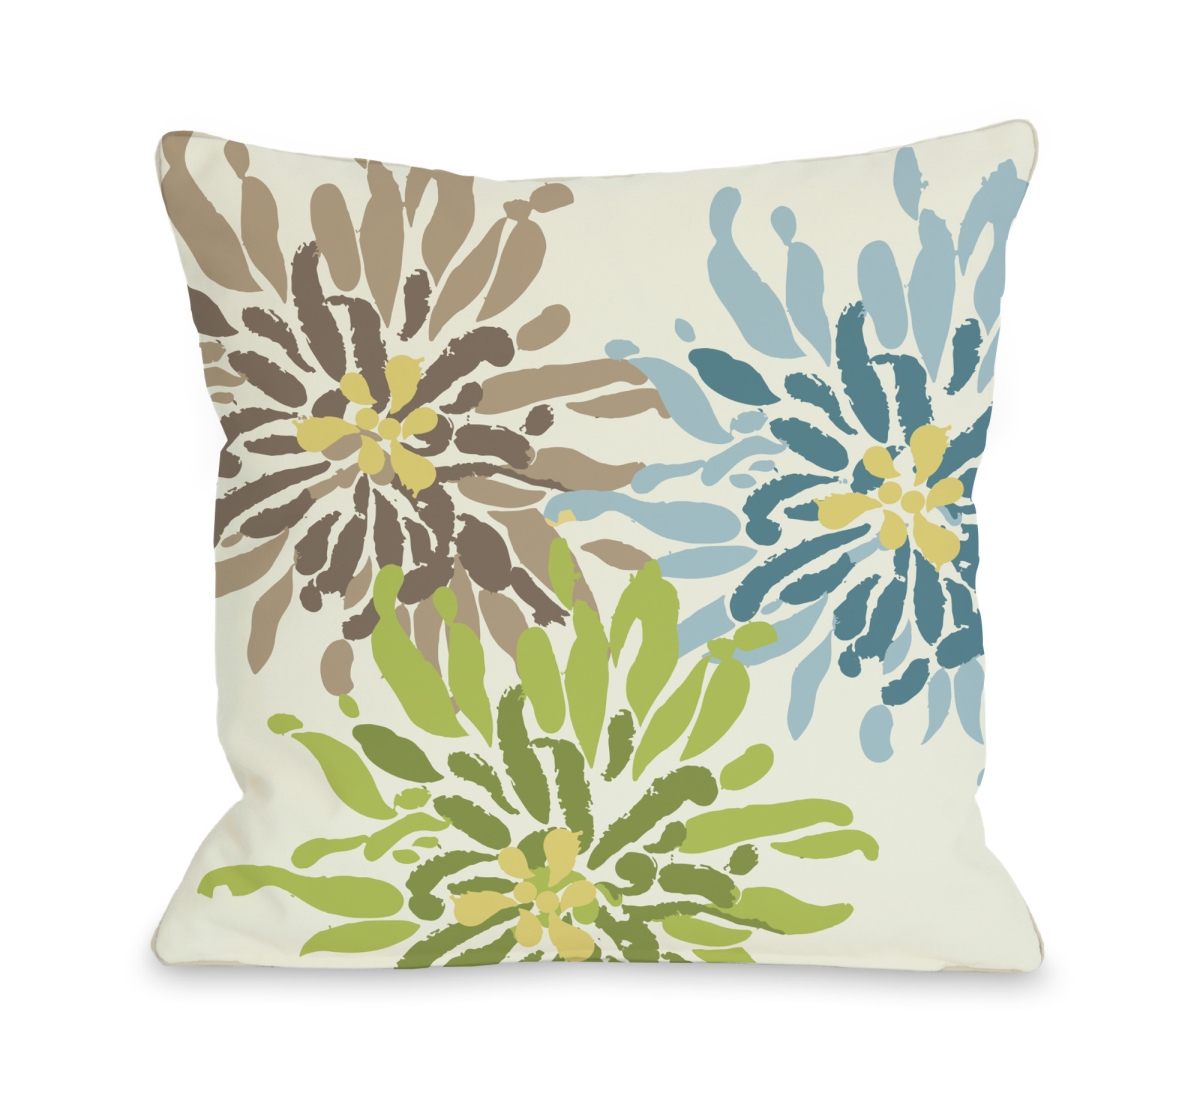 70663pl16o 16 X 16 In. Lowell Floral Pillow Outdoor, Multicolor